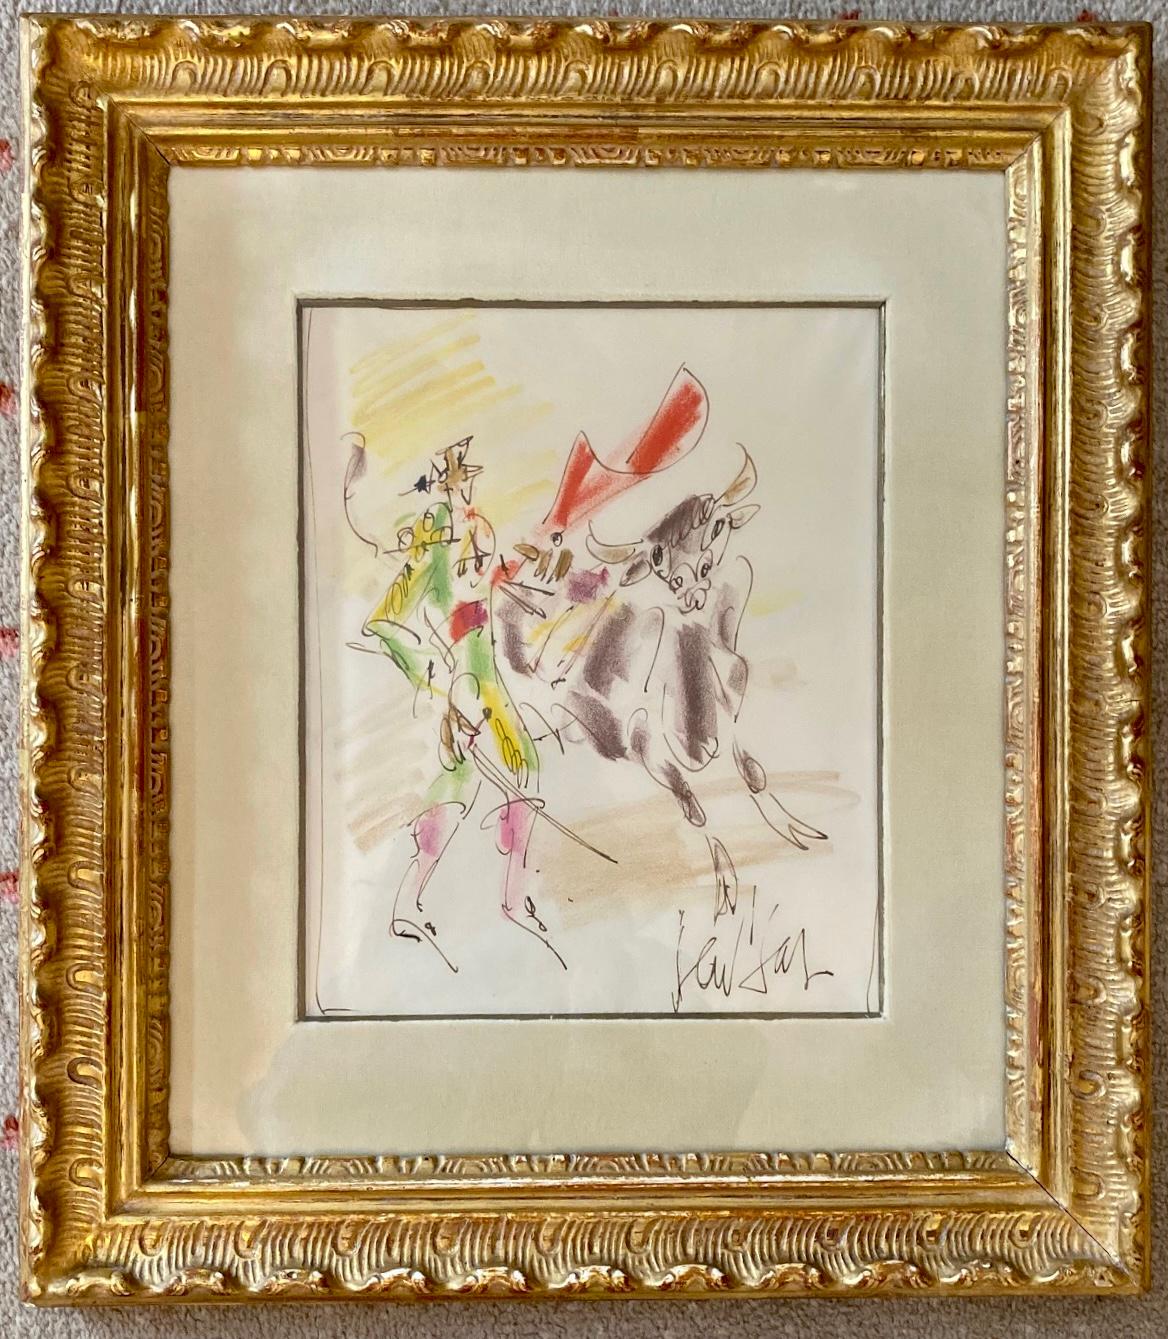 Framed watercolor on paper of a Matador or bull fighter by French artist Gen Paul. Signed lower right. Measures 19